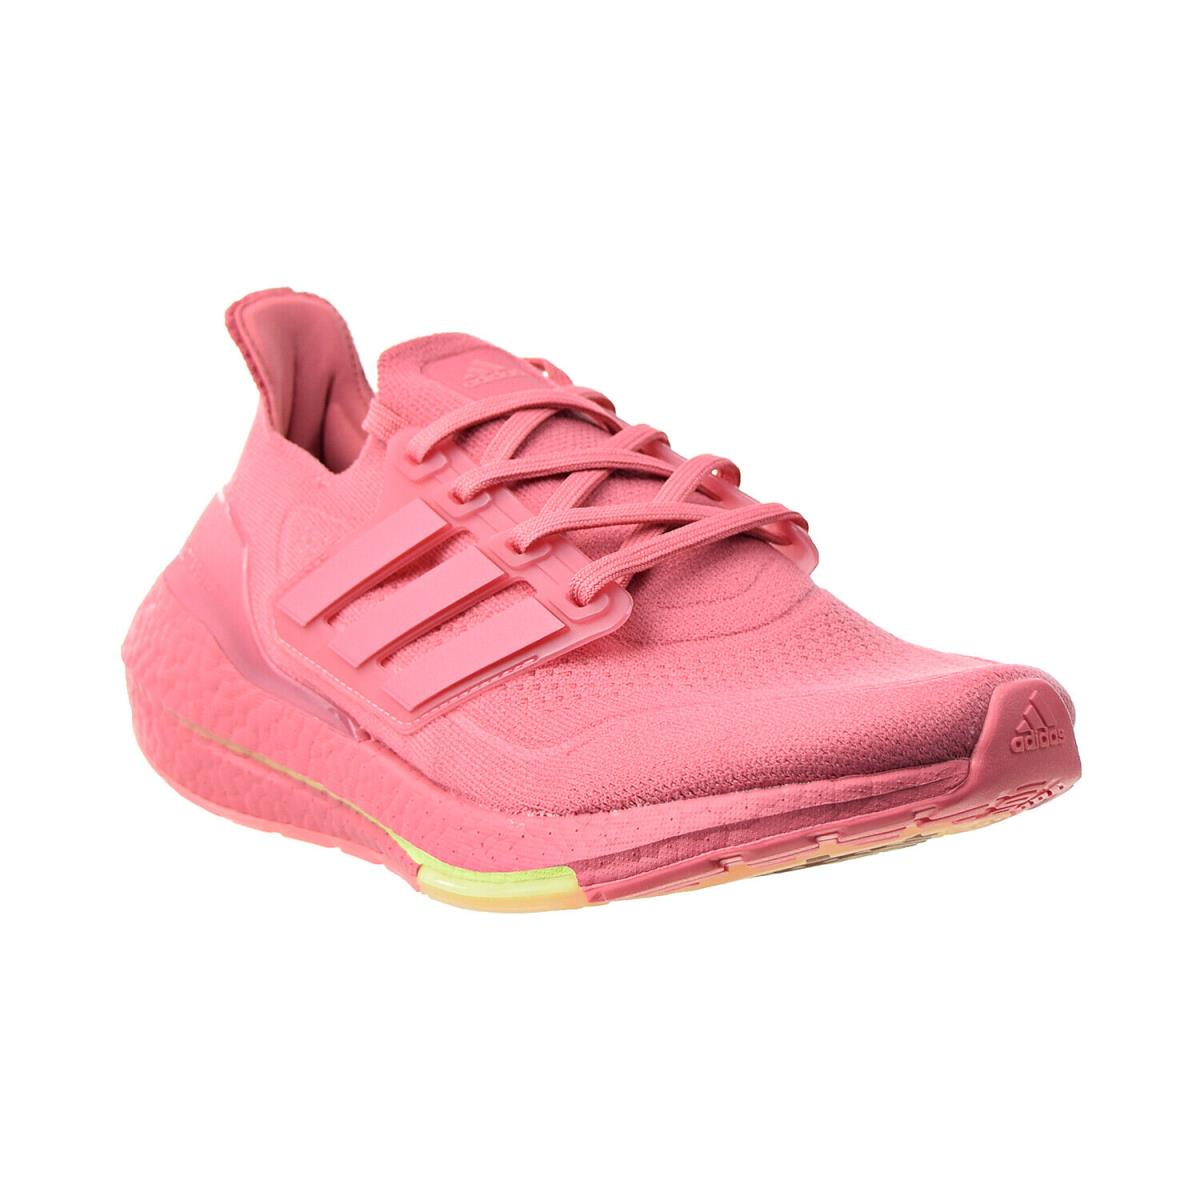 Adidas Ultraboost 21 W Women`s Shoes Pink FY0426 - Pink